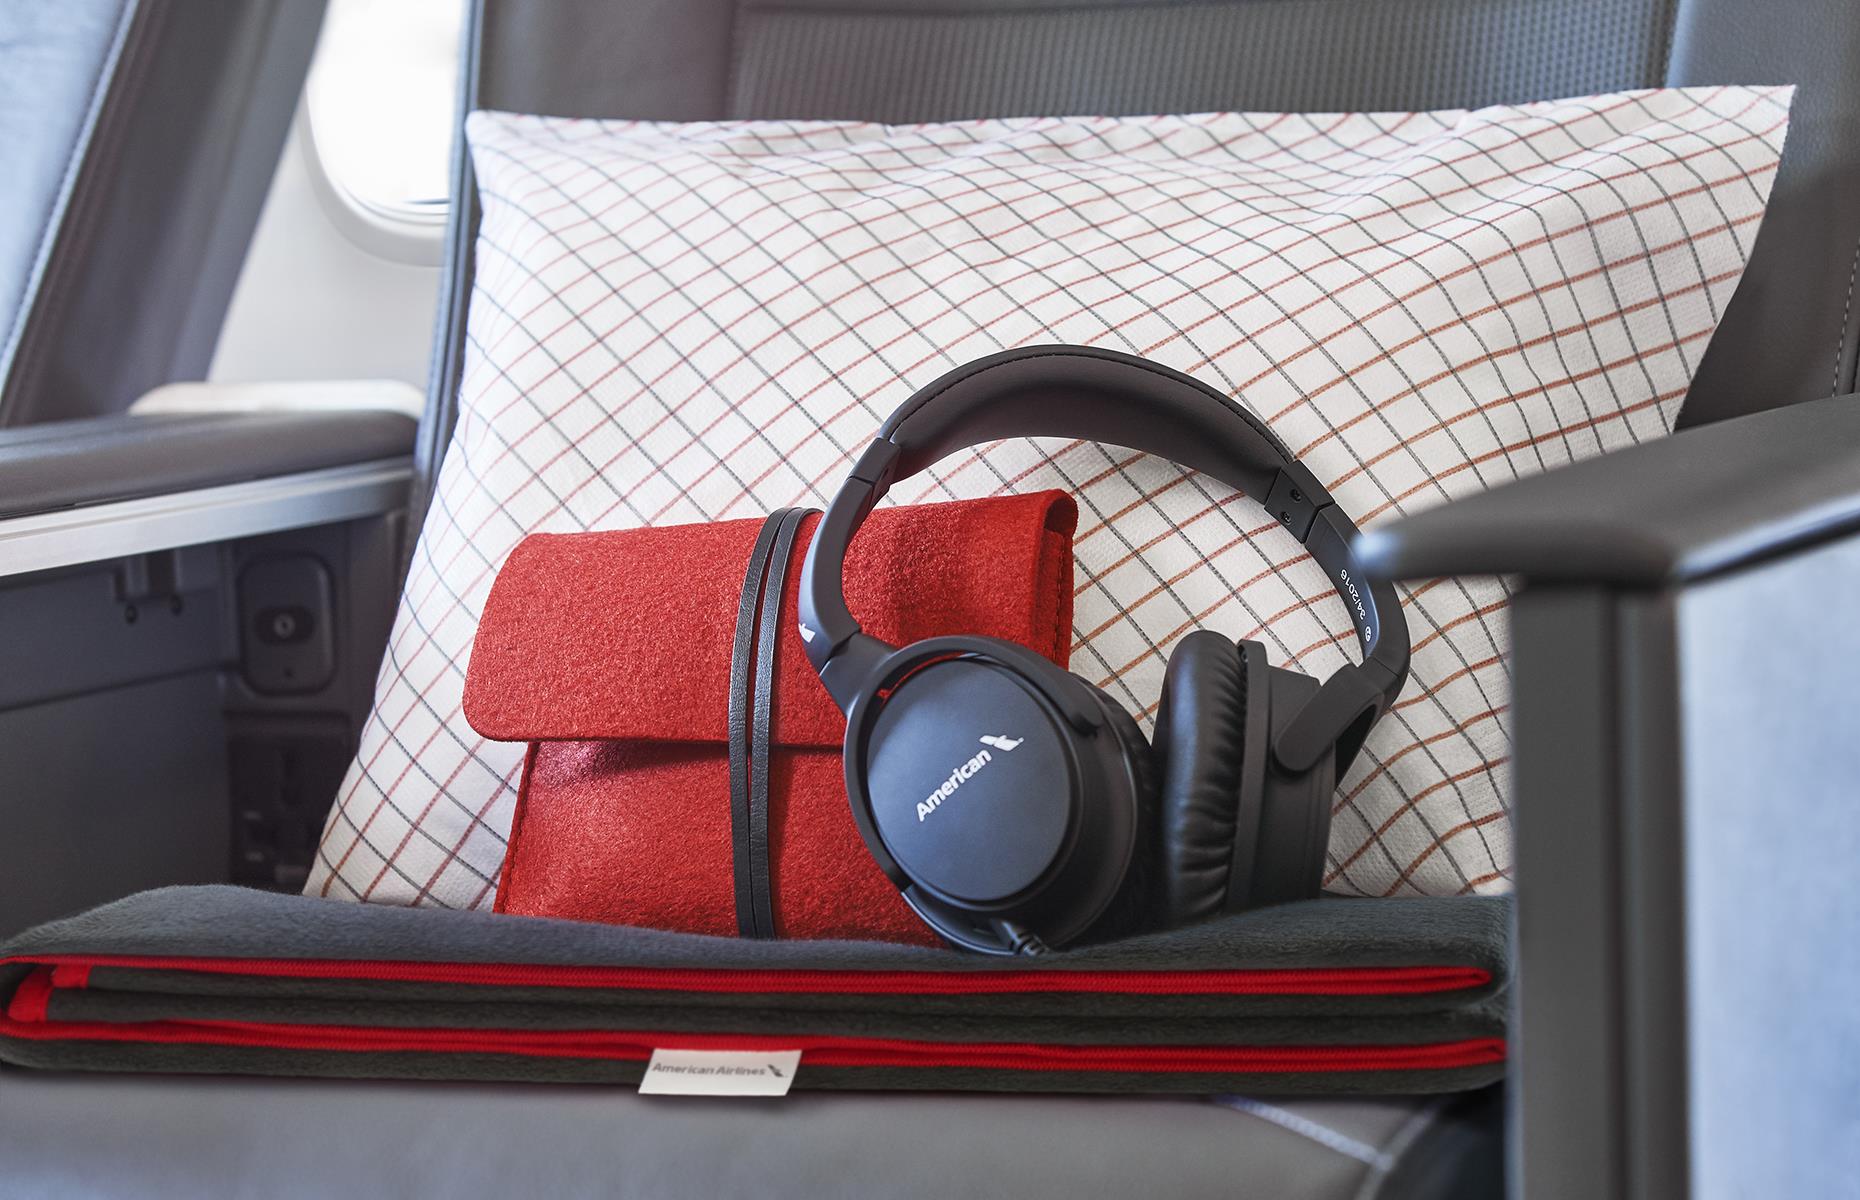 Firstly, why would you want to steal economy headphones? Secondly, in premium economy and above, you aren’t allowed to take them with you, sadly.   For instance, Bang & Olufsen headphones are handed out in American Airlines business class – the flight attendants keep track and know exactly who’s used a pair, so you won't get away with it even if you did try to nab them.